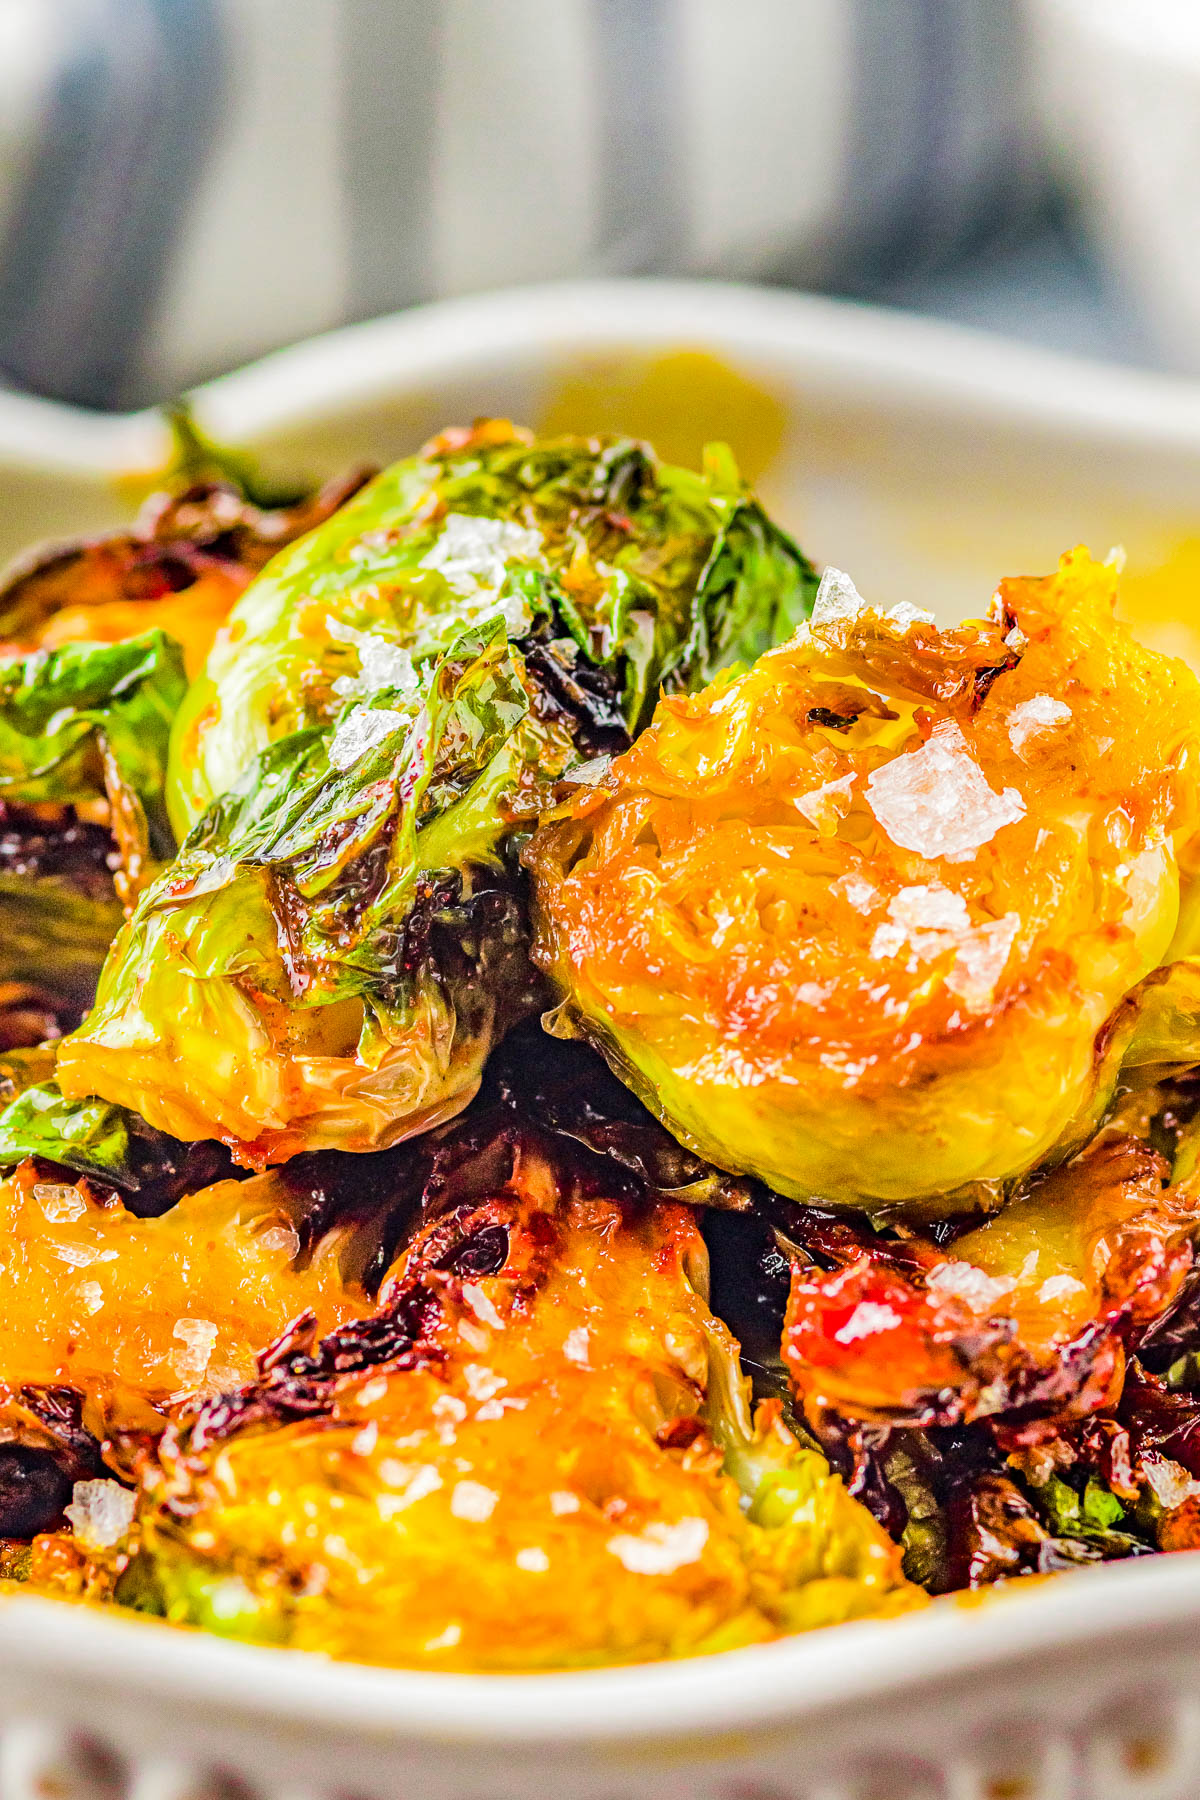 Air Fryer Brussels Sprouts with Sweet and Spicy Glaze - The air fryer makes these Brussels sprouts perfectly crispy on the outside, tender on the inside, and the mildly spicy honey butter glaze makes them IRRESISTIBLE! An EASY side dish for busy weeknights, family dinners, or Thanksgiving that's ready FAST!